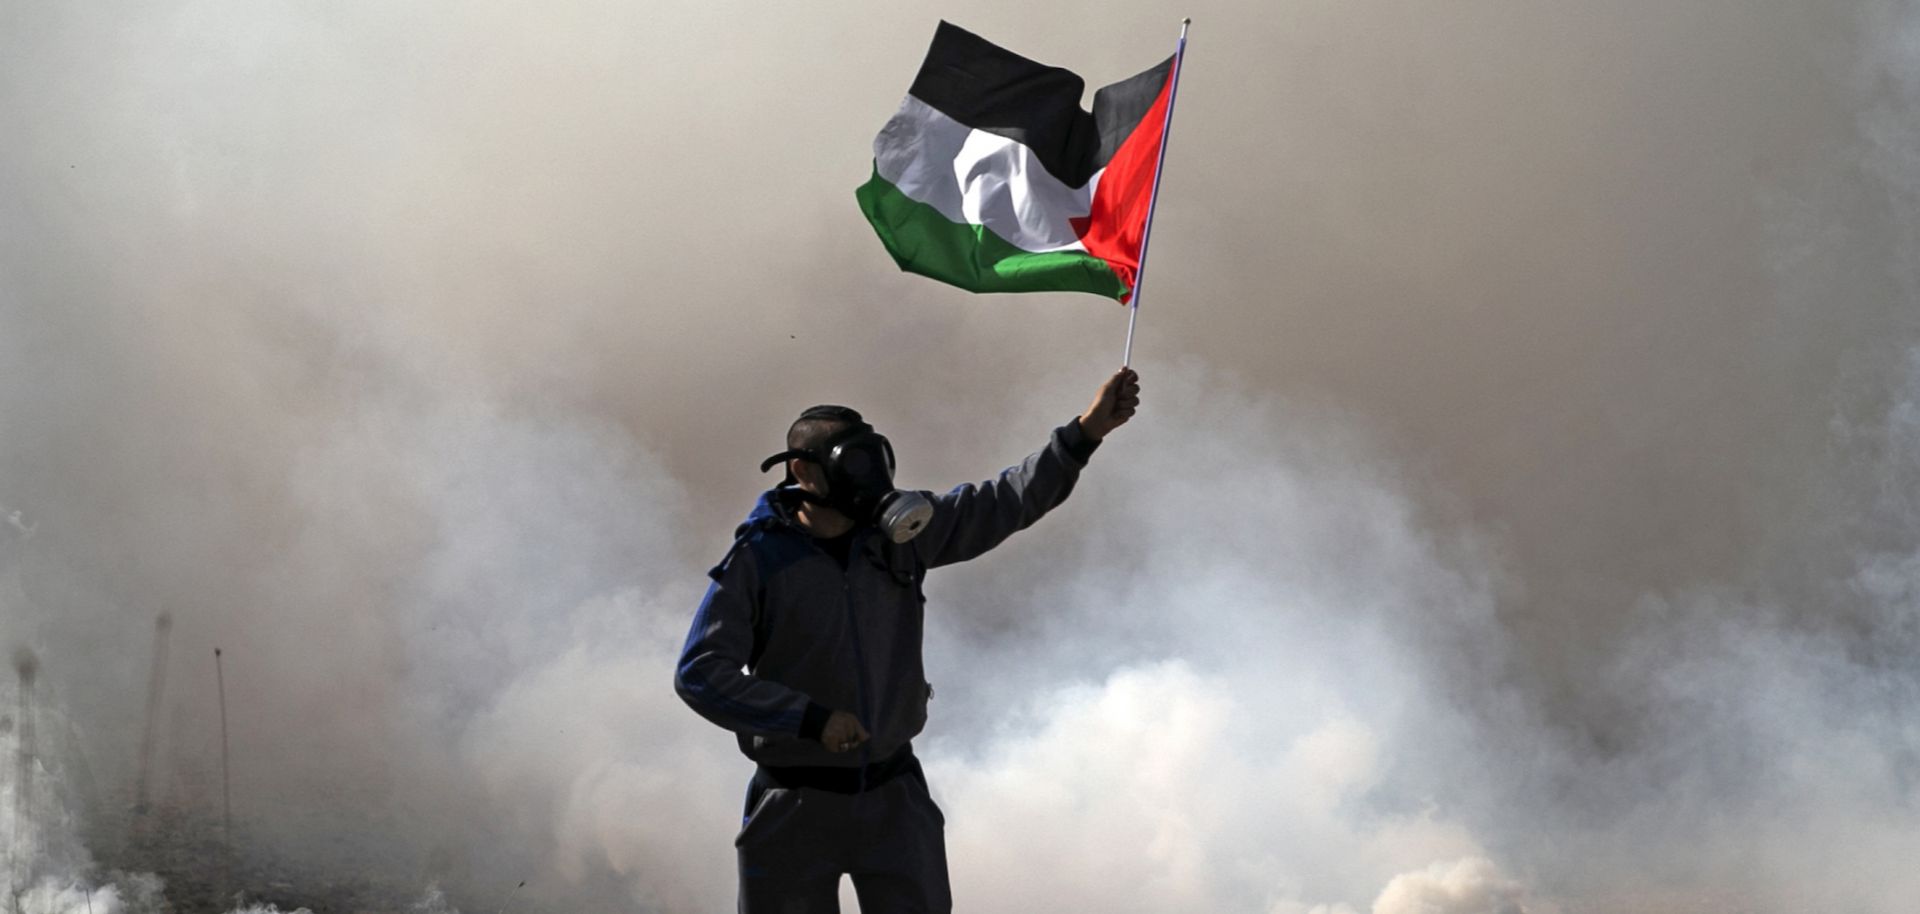 A protester waves the Palestinian flag amid smoke from tear gas fired by Israeli security forces during a demonstration near the West Bank village of Beit Dajan on Dec. 18, 2020. 